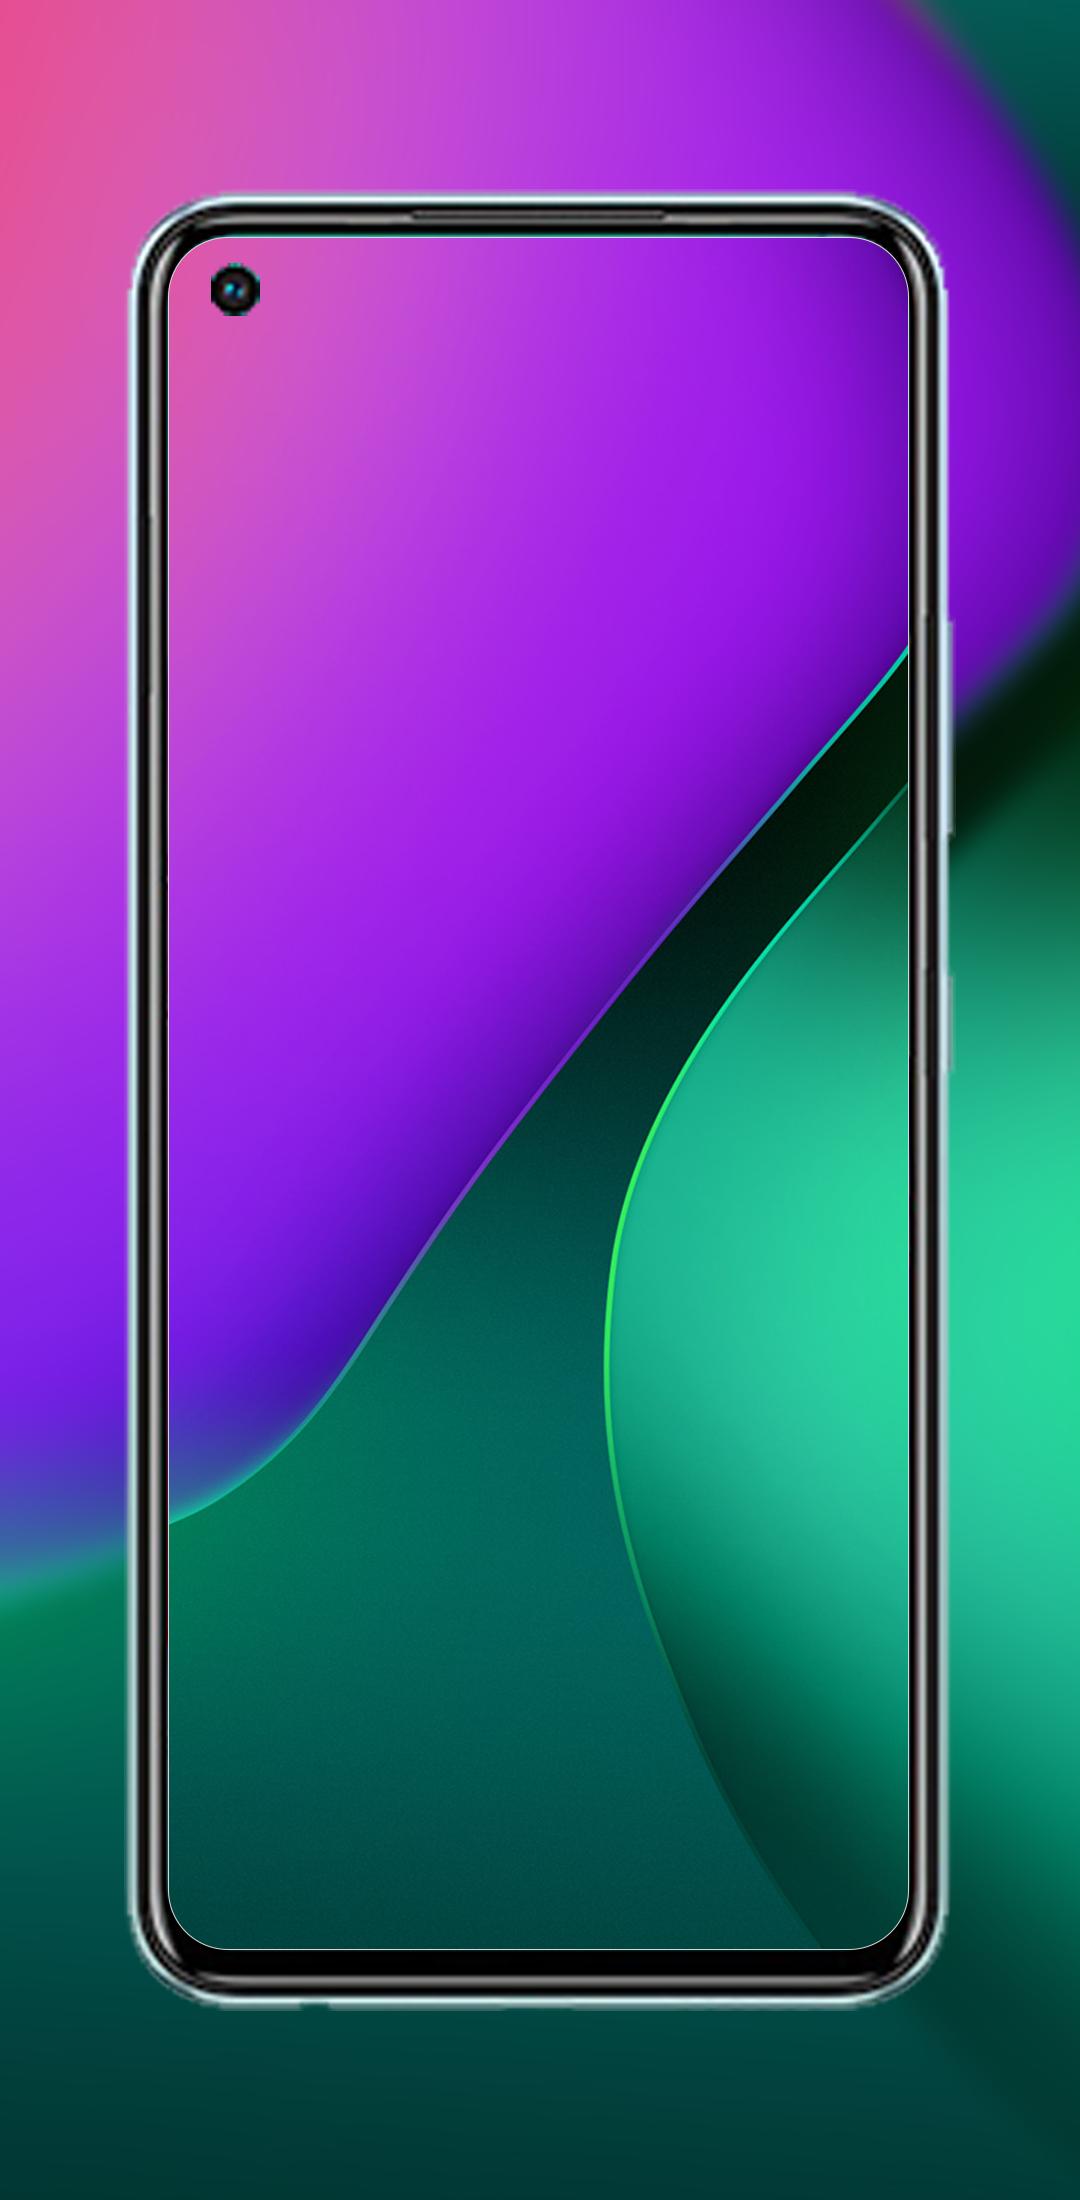 Wallpaper For Infinix Note Pro Android Apk